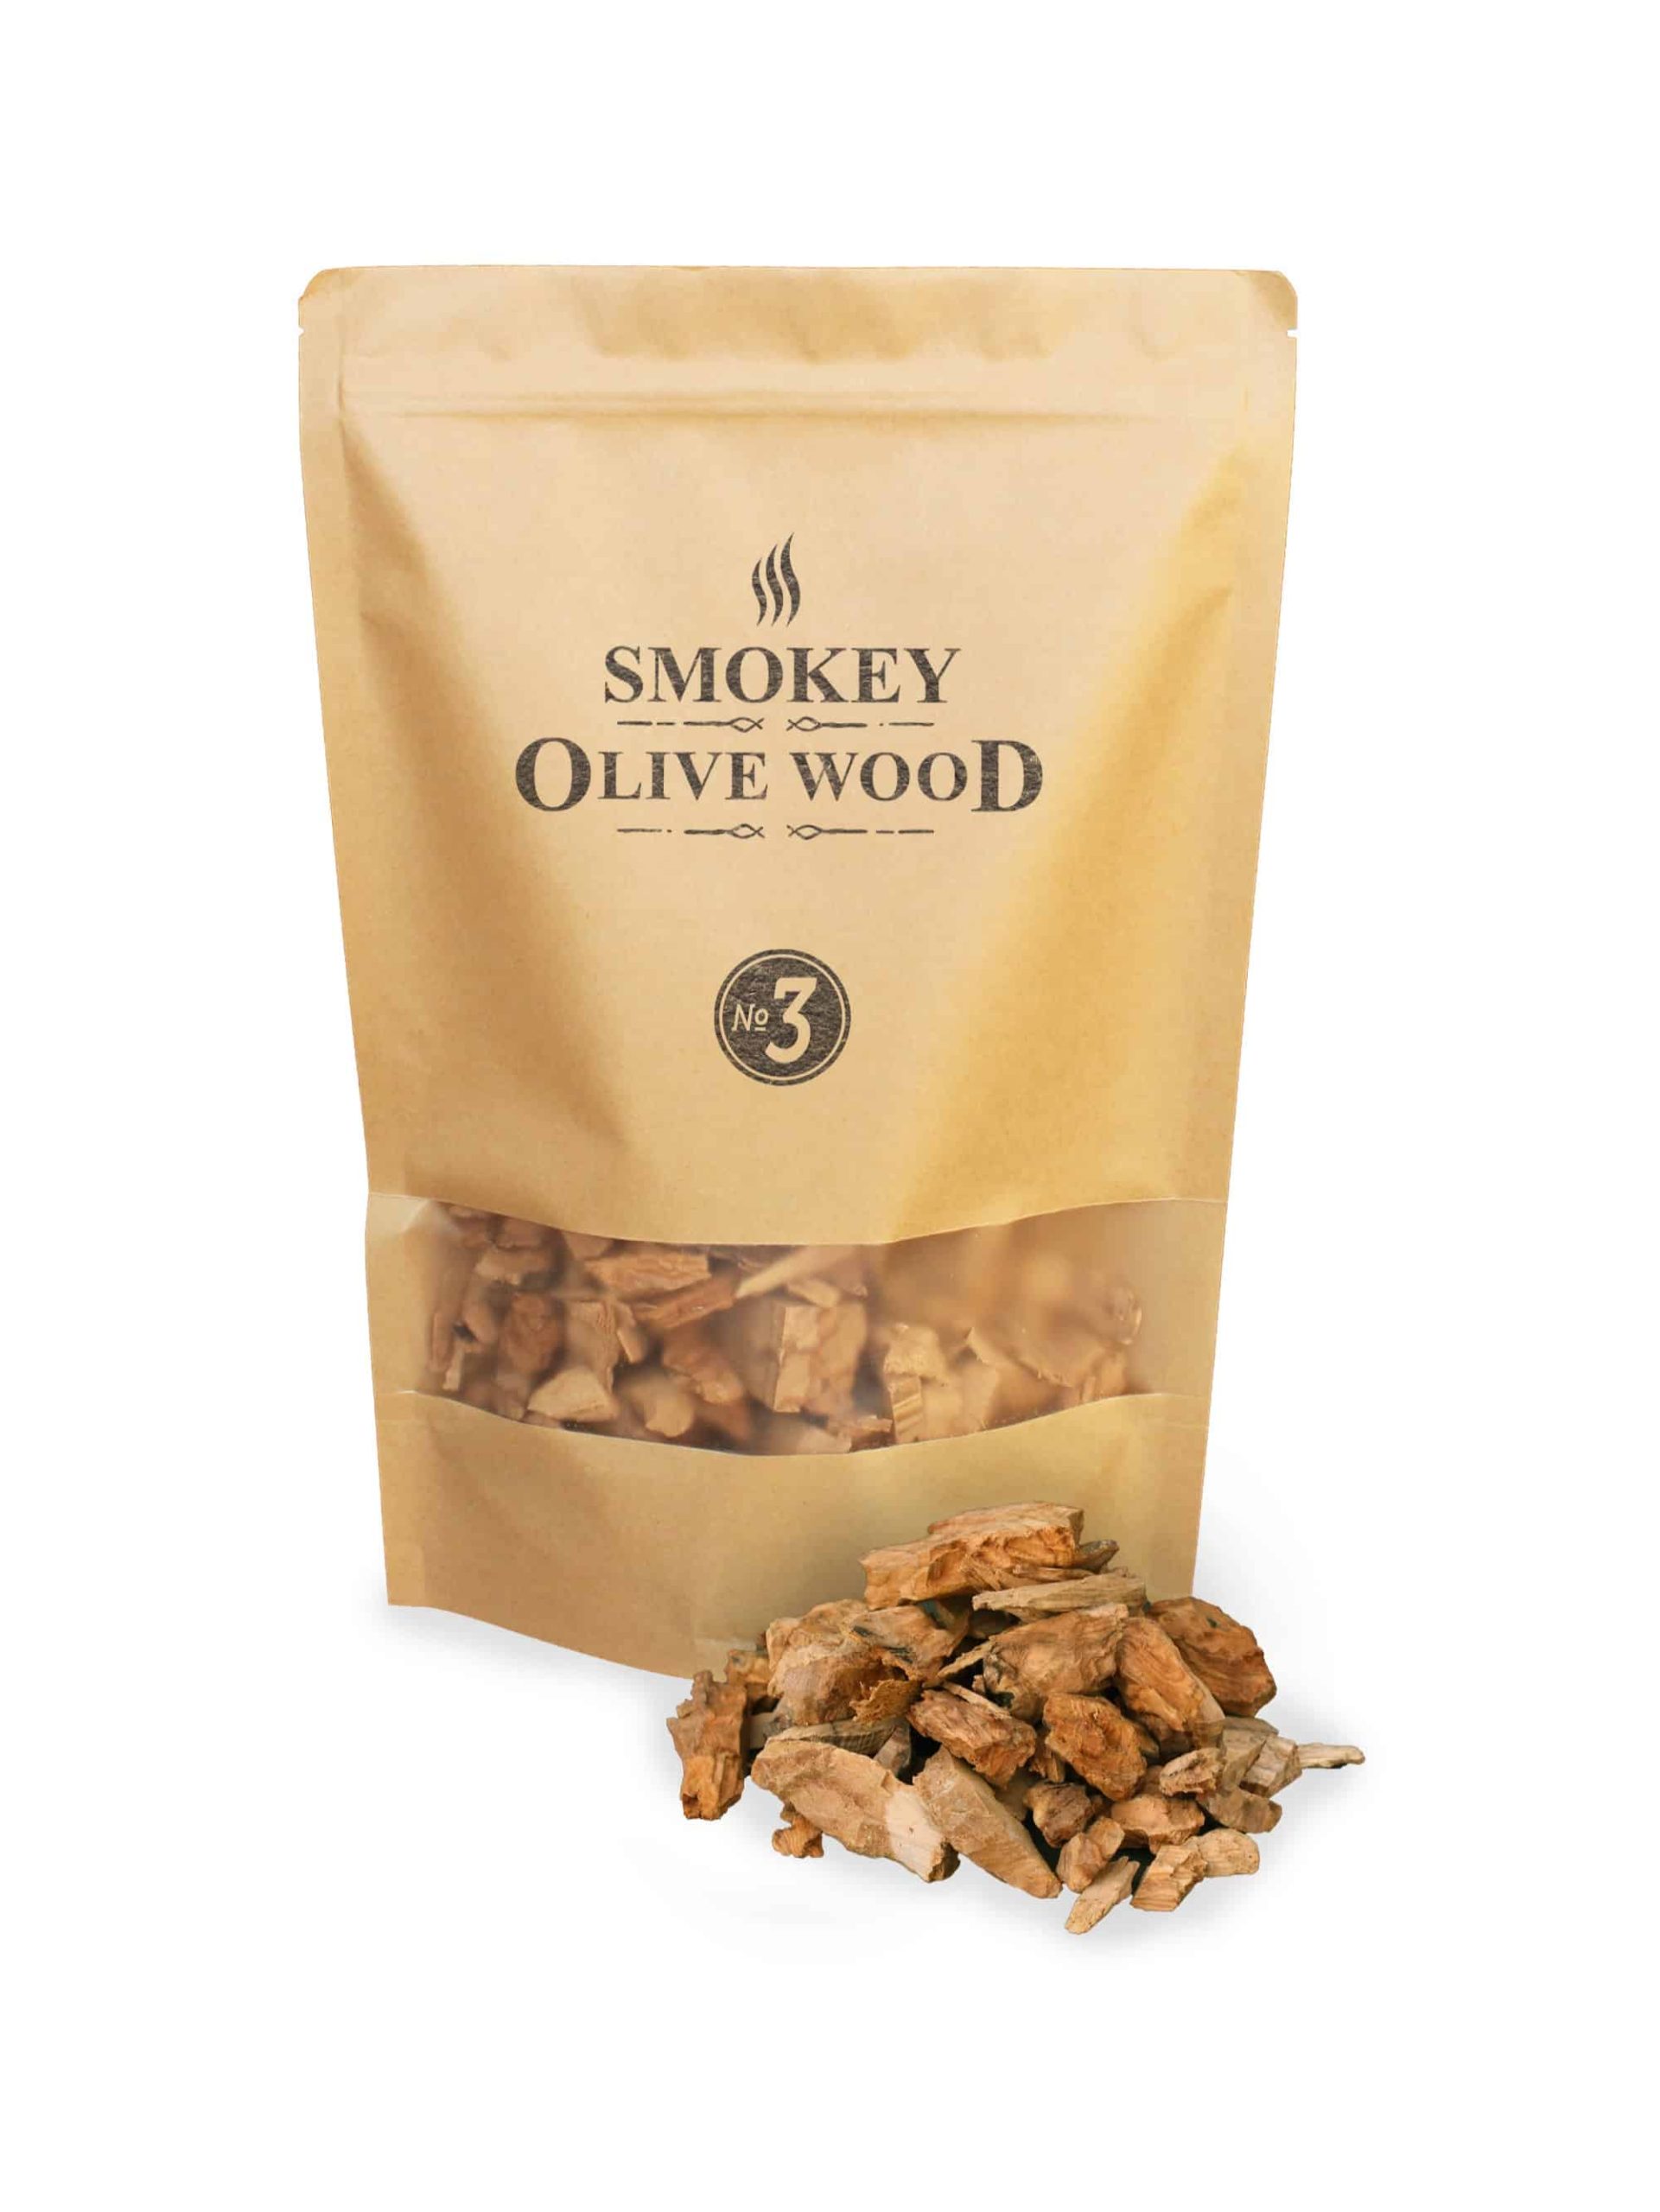 SOW Olive Wood Smoking Chips Nº3